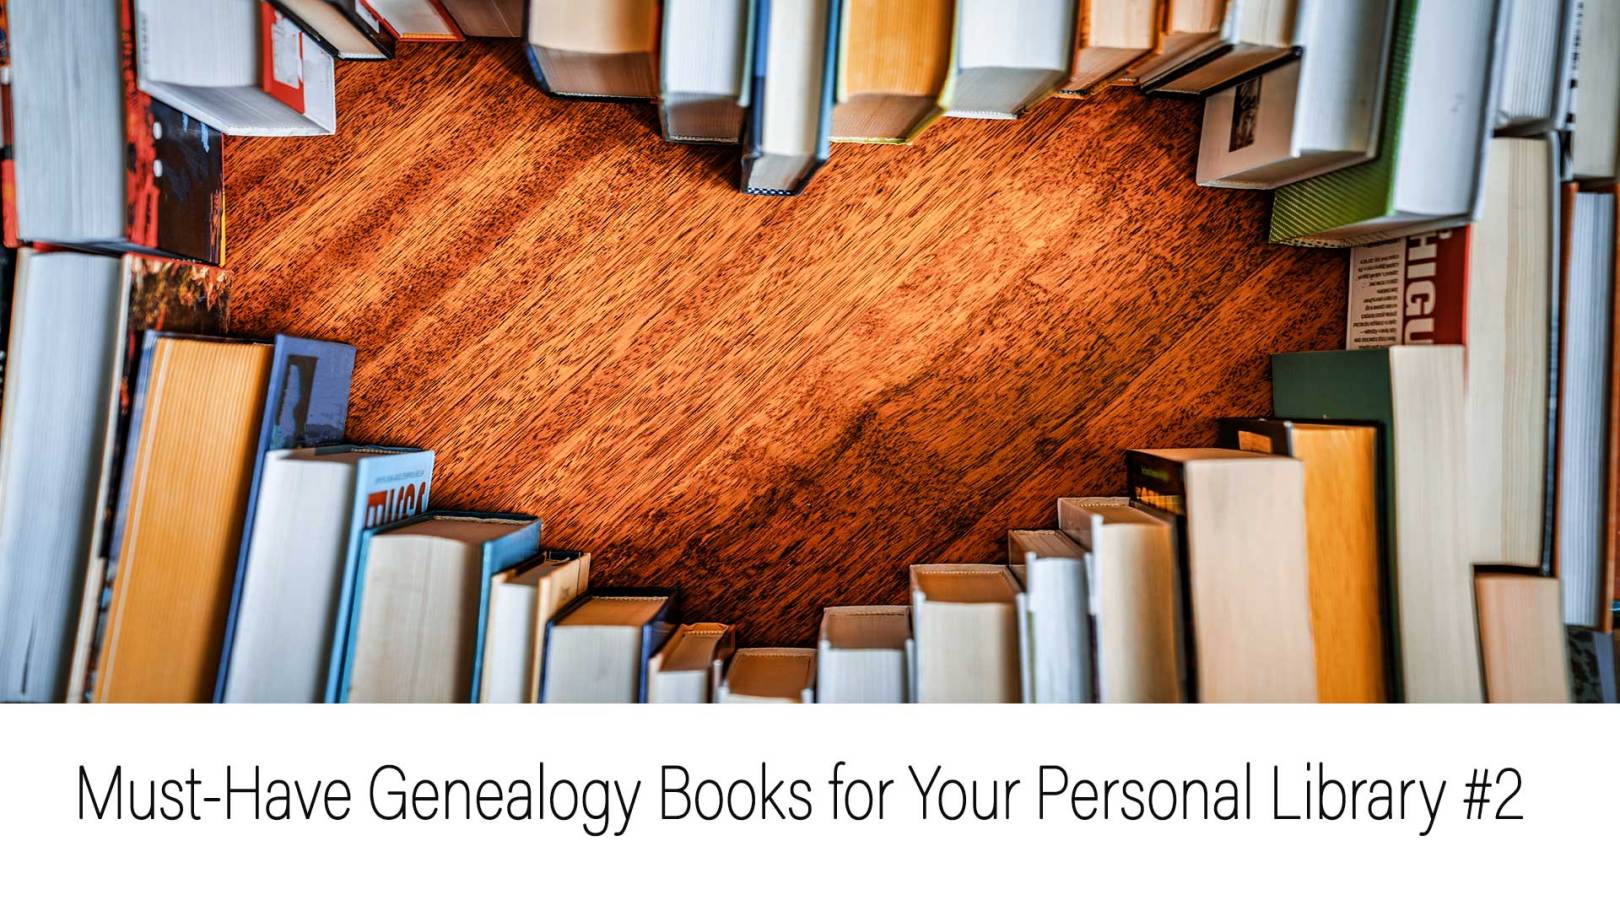 Must-Have Genealogy Books for Your Personal Library #2